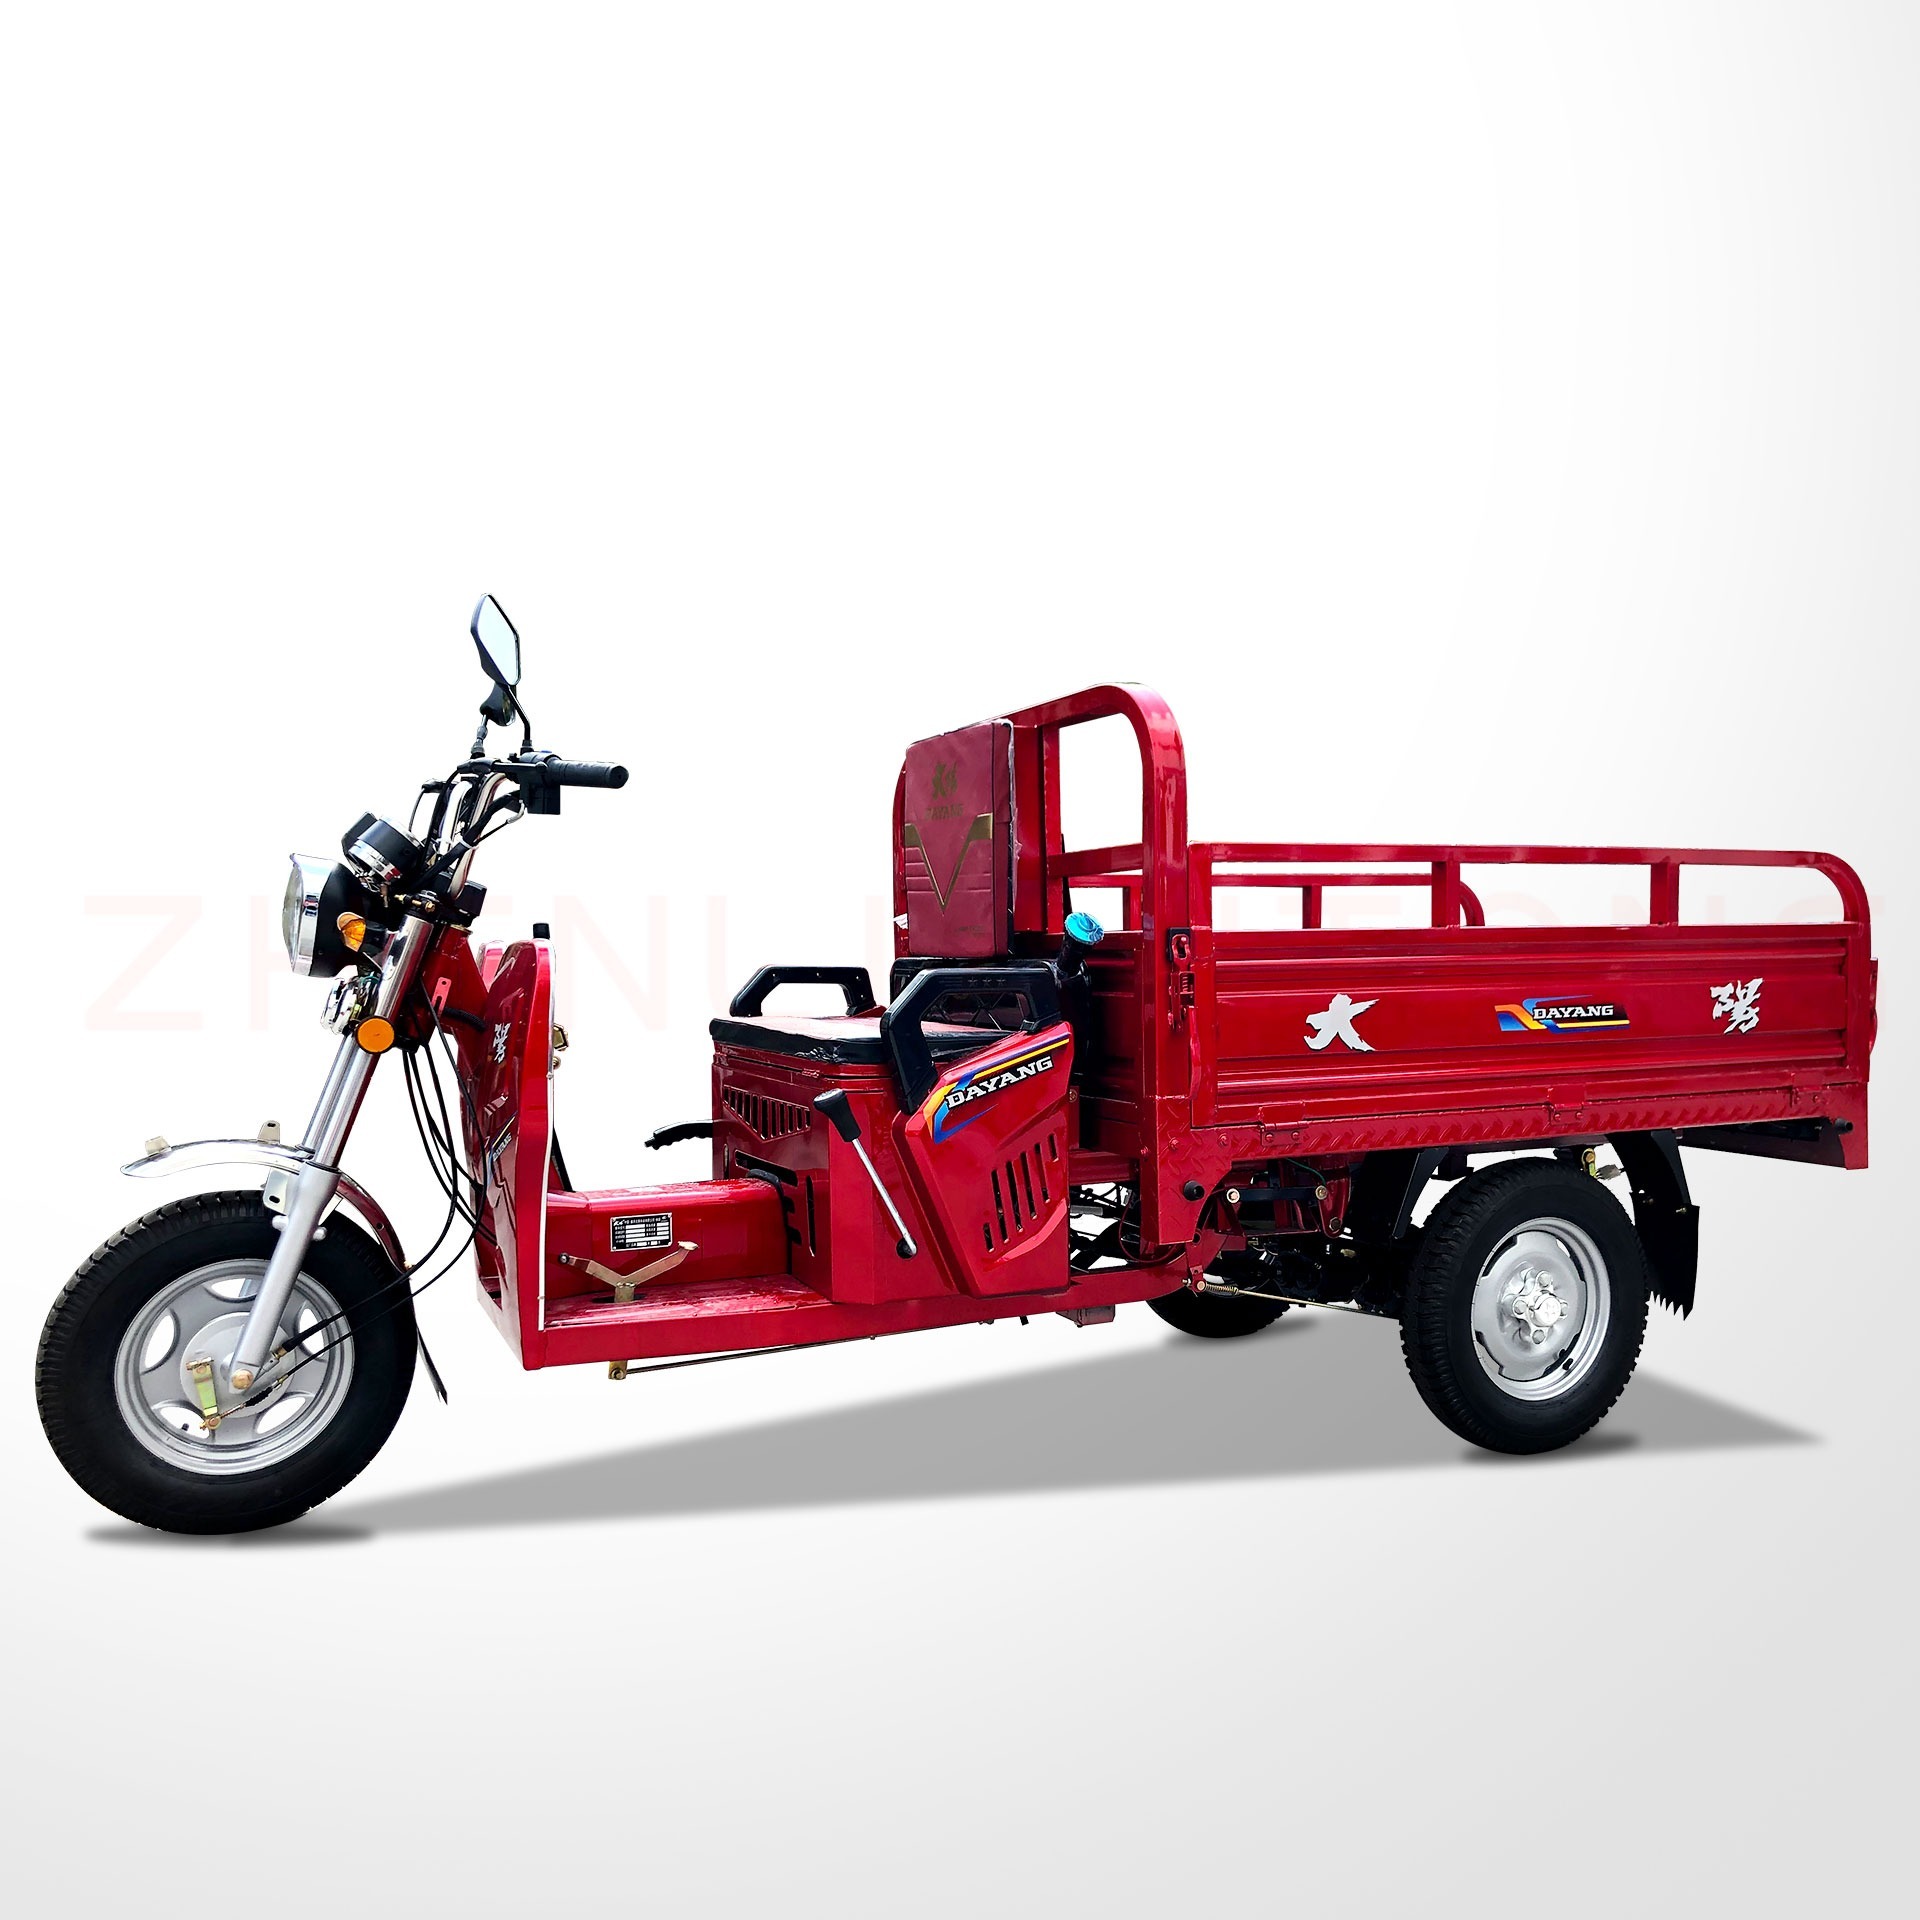 Dayang Motorized Passenger Tricycle 3 Wheel Motorcycle 201-250cc 201 - 250cc Air-cooling Engine Gasoline Open Type For Global